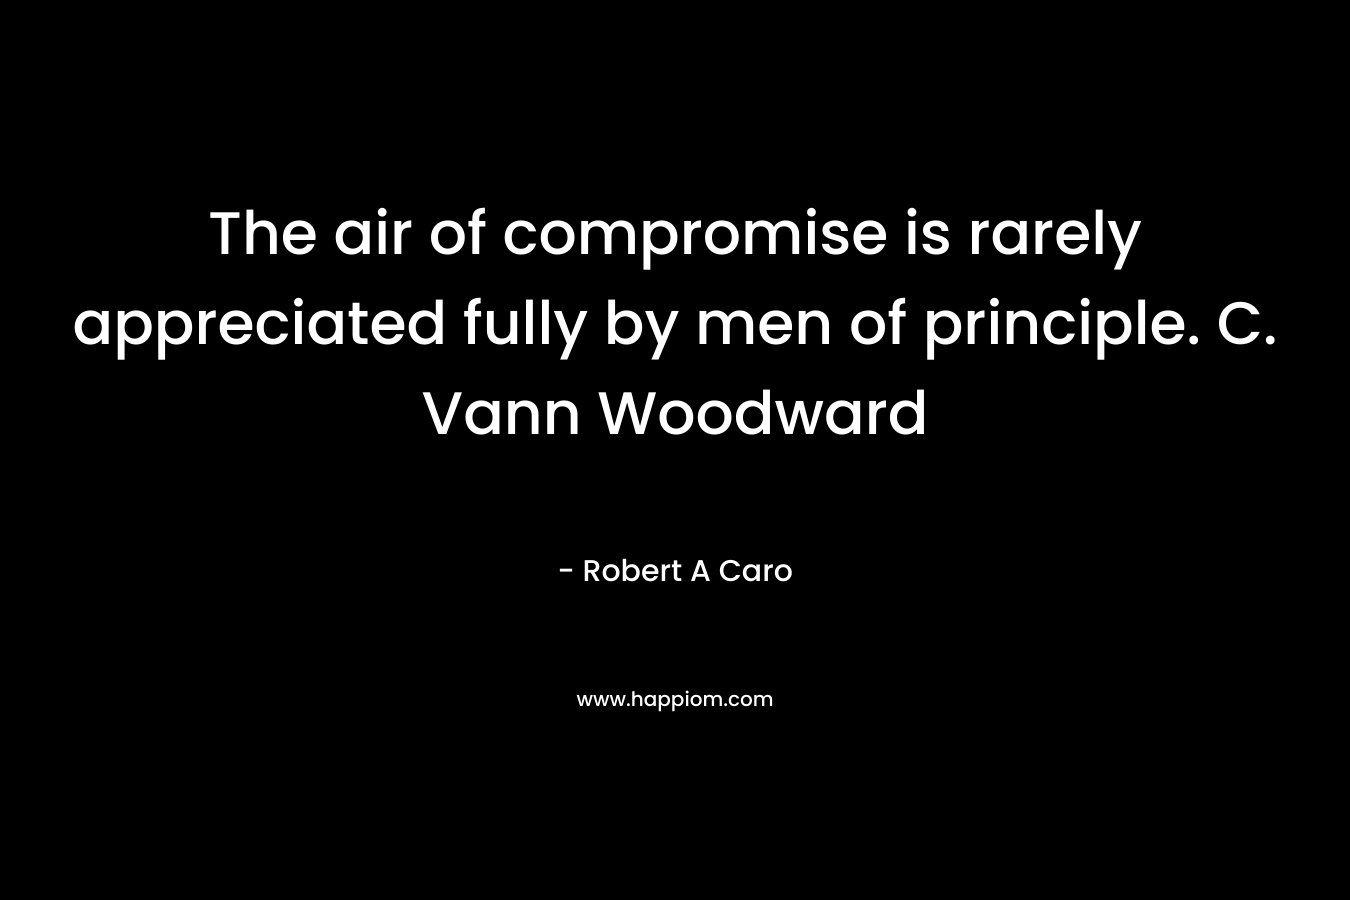 The air of compromise is rarely appreciated fully by men of principle. C. Vann Woodward